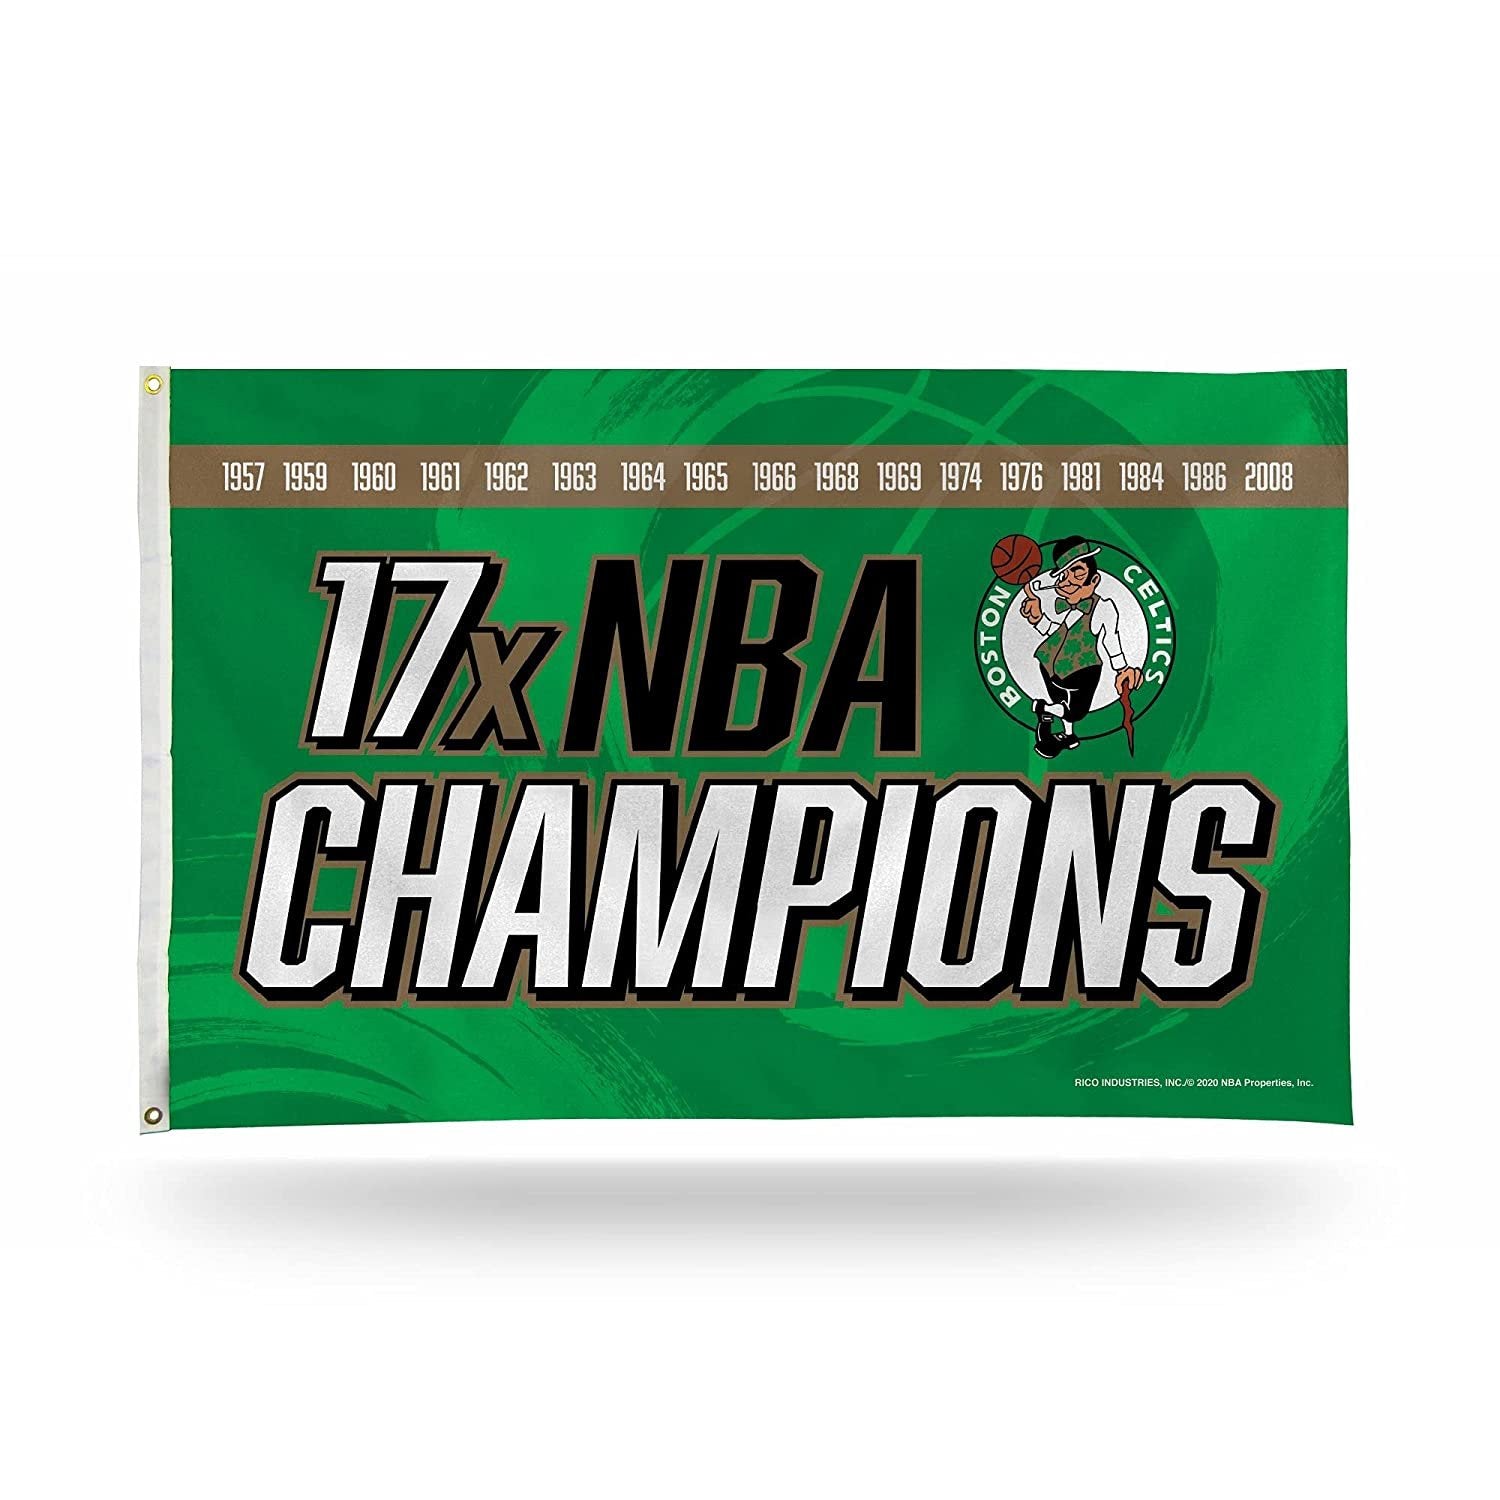 Boston Celtics 3x5 Feet Flag Banner, 17-Time Champions, Metal Grommets, Outdoor House, Single Sided